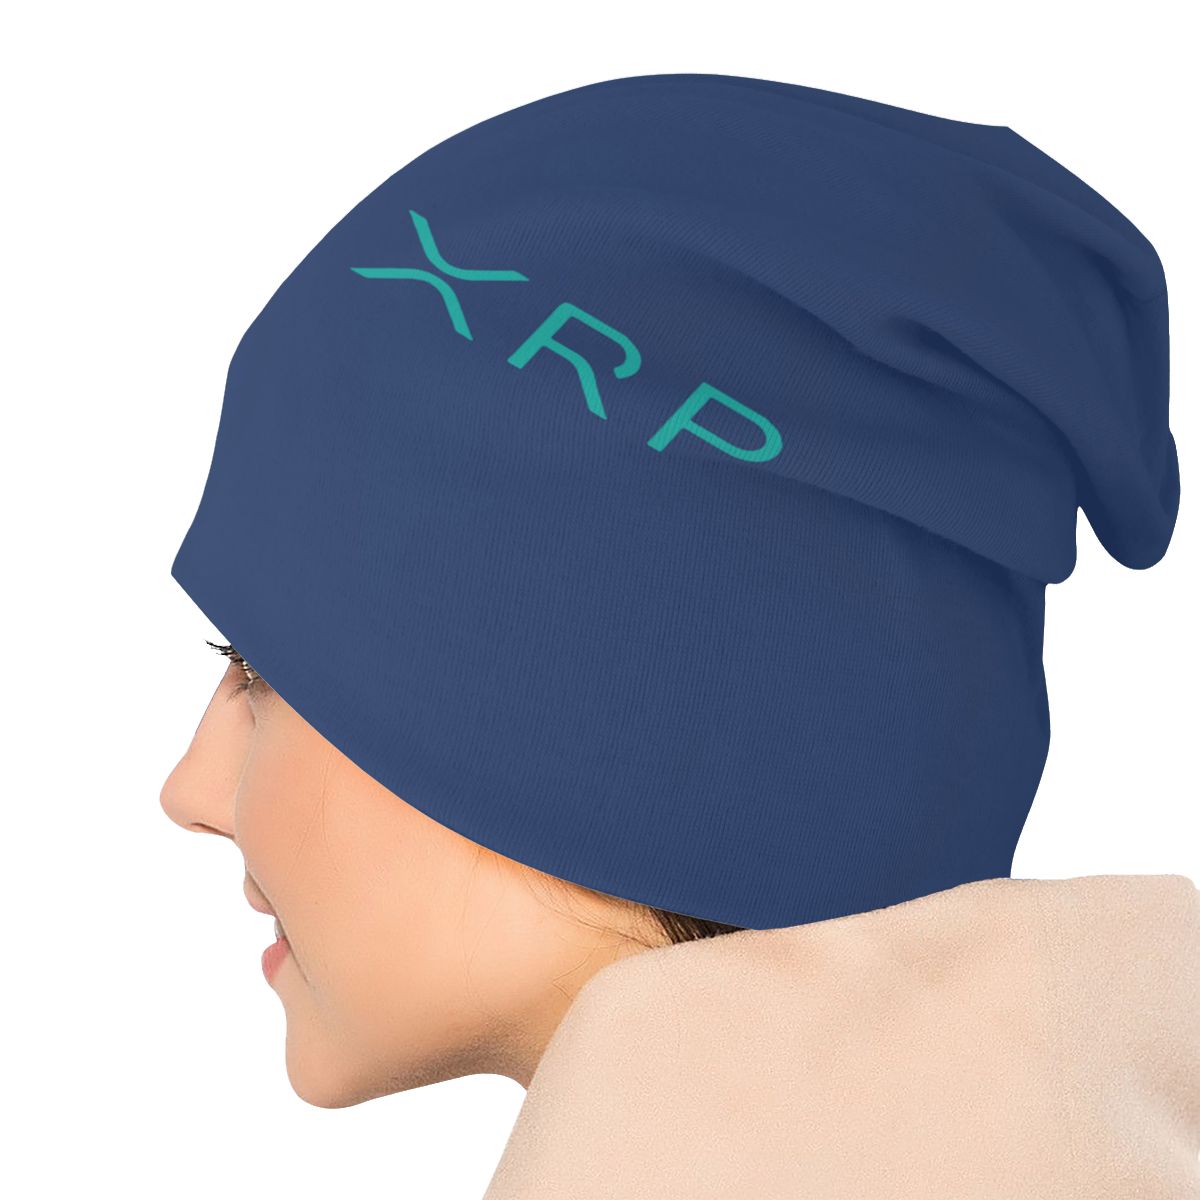 Xrp Ripple knitted hat